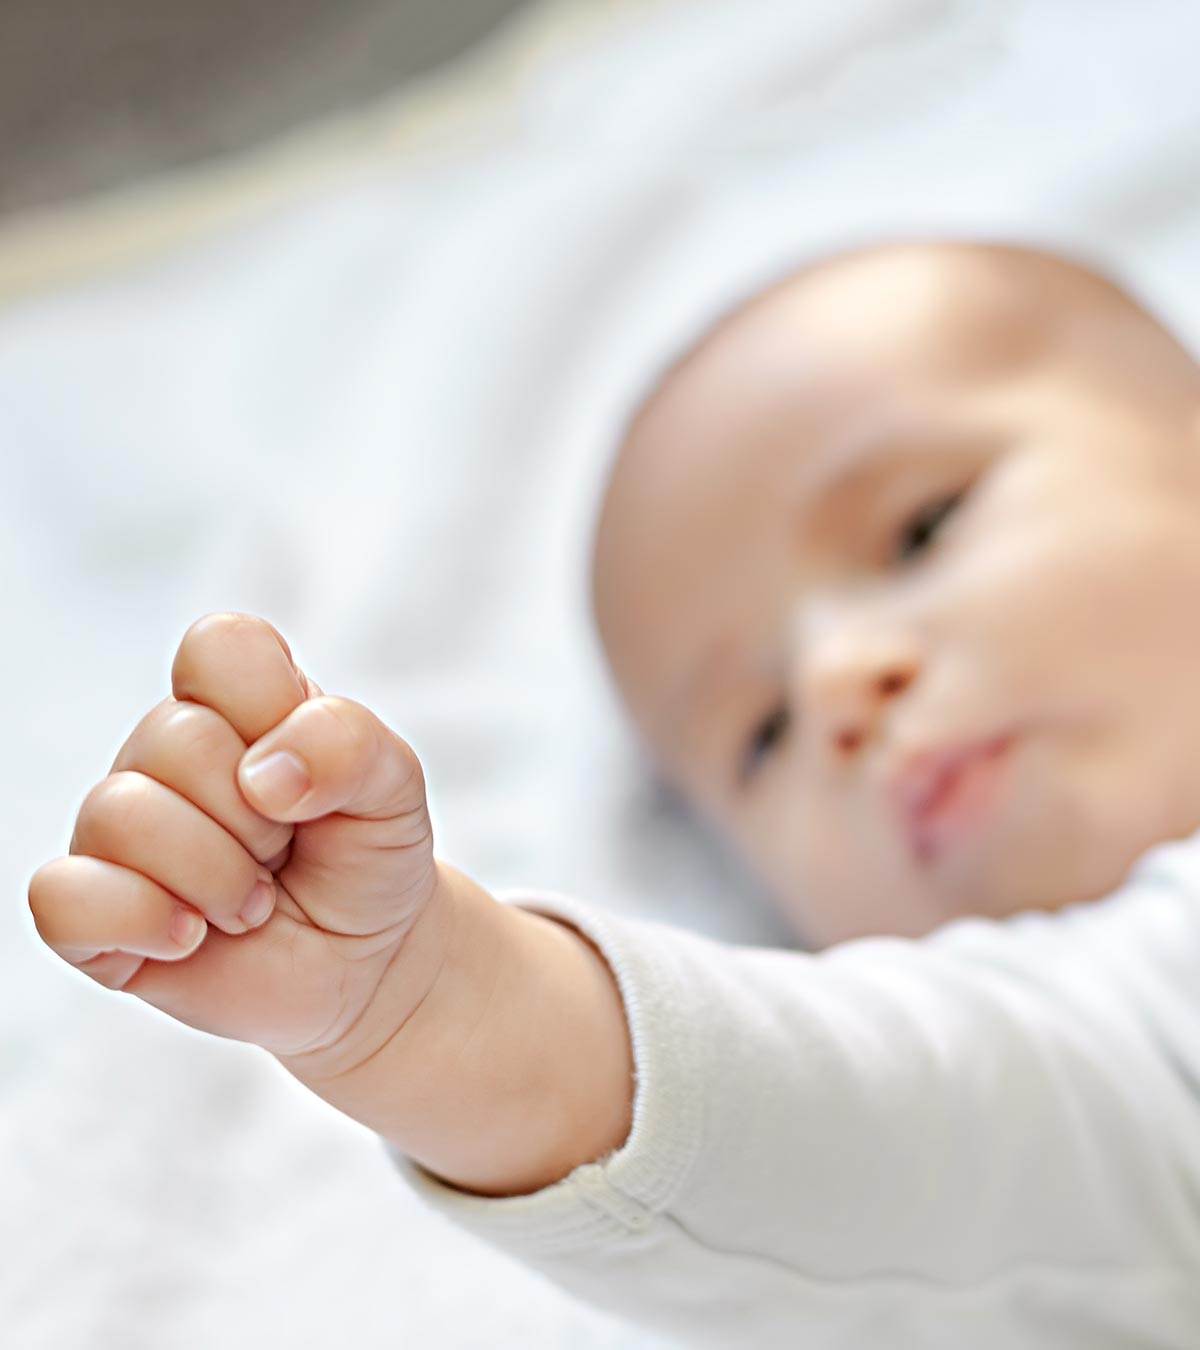 45 Strong And Powerful Baby Boy Names With Meanings